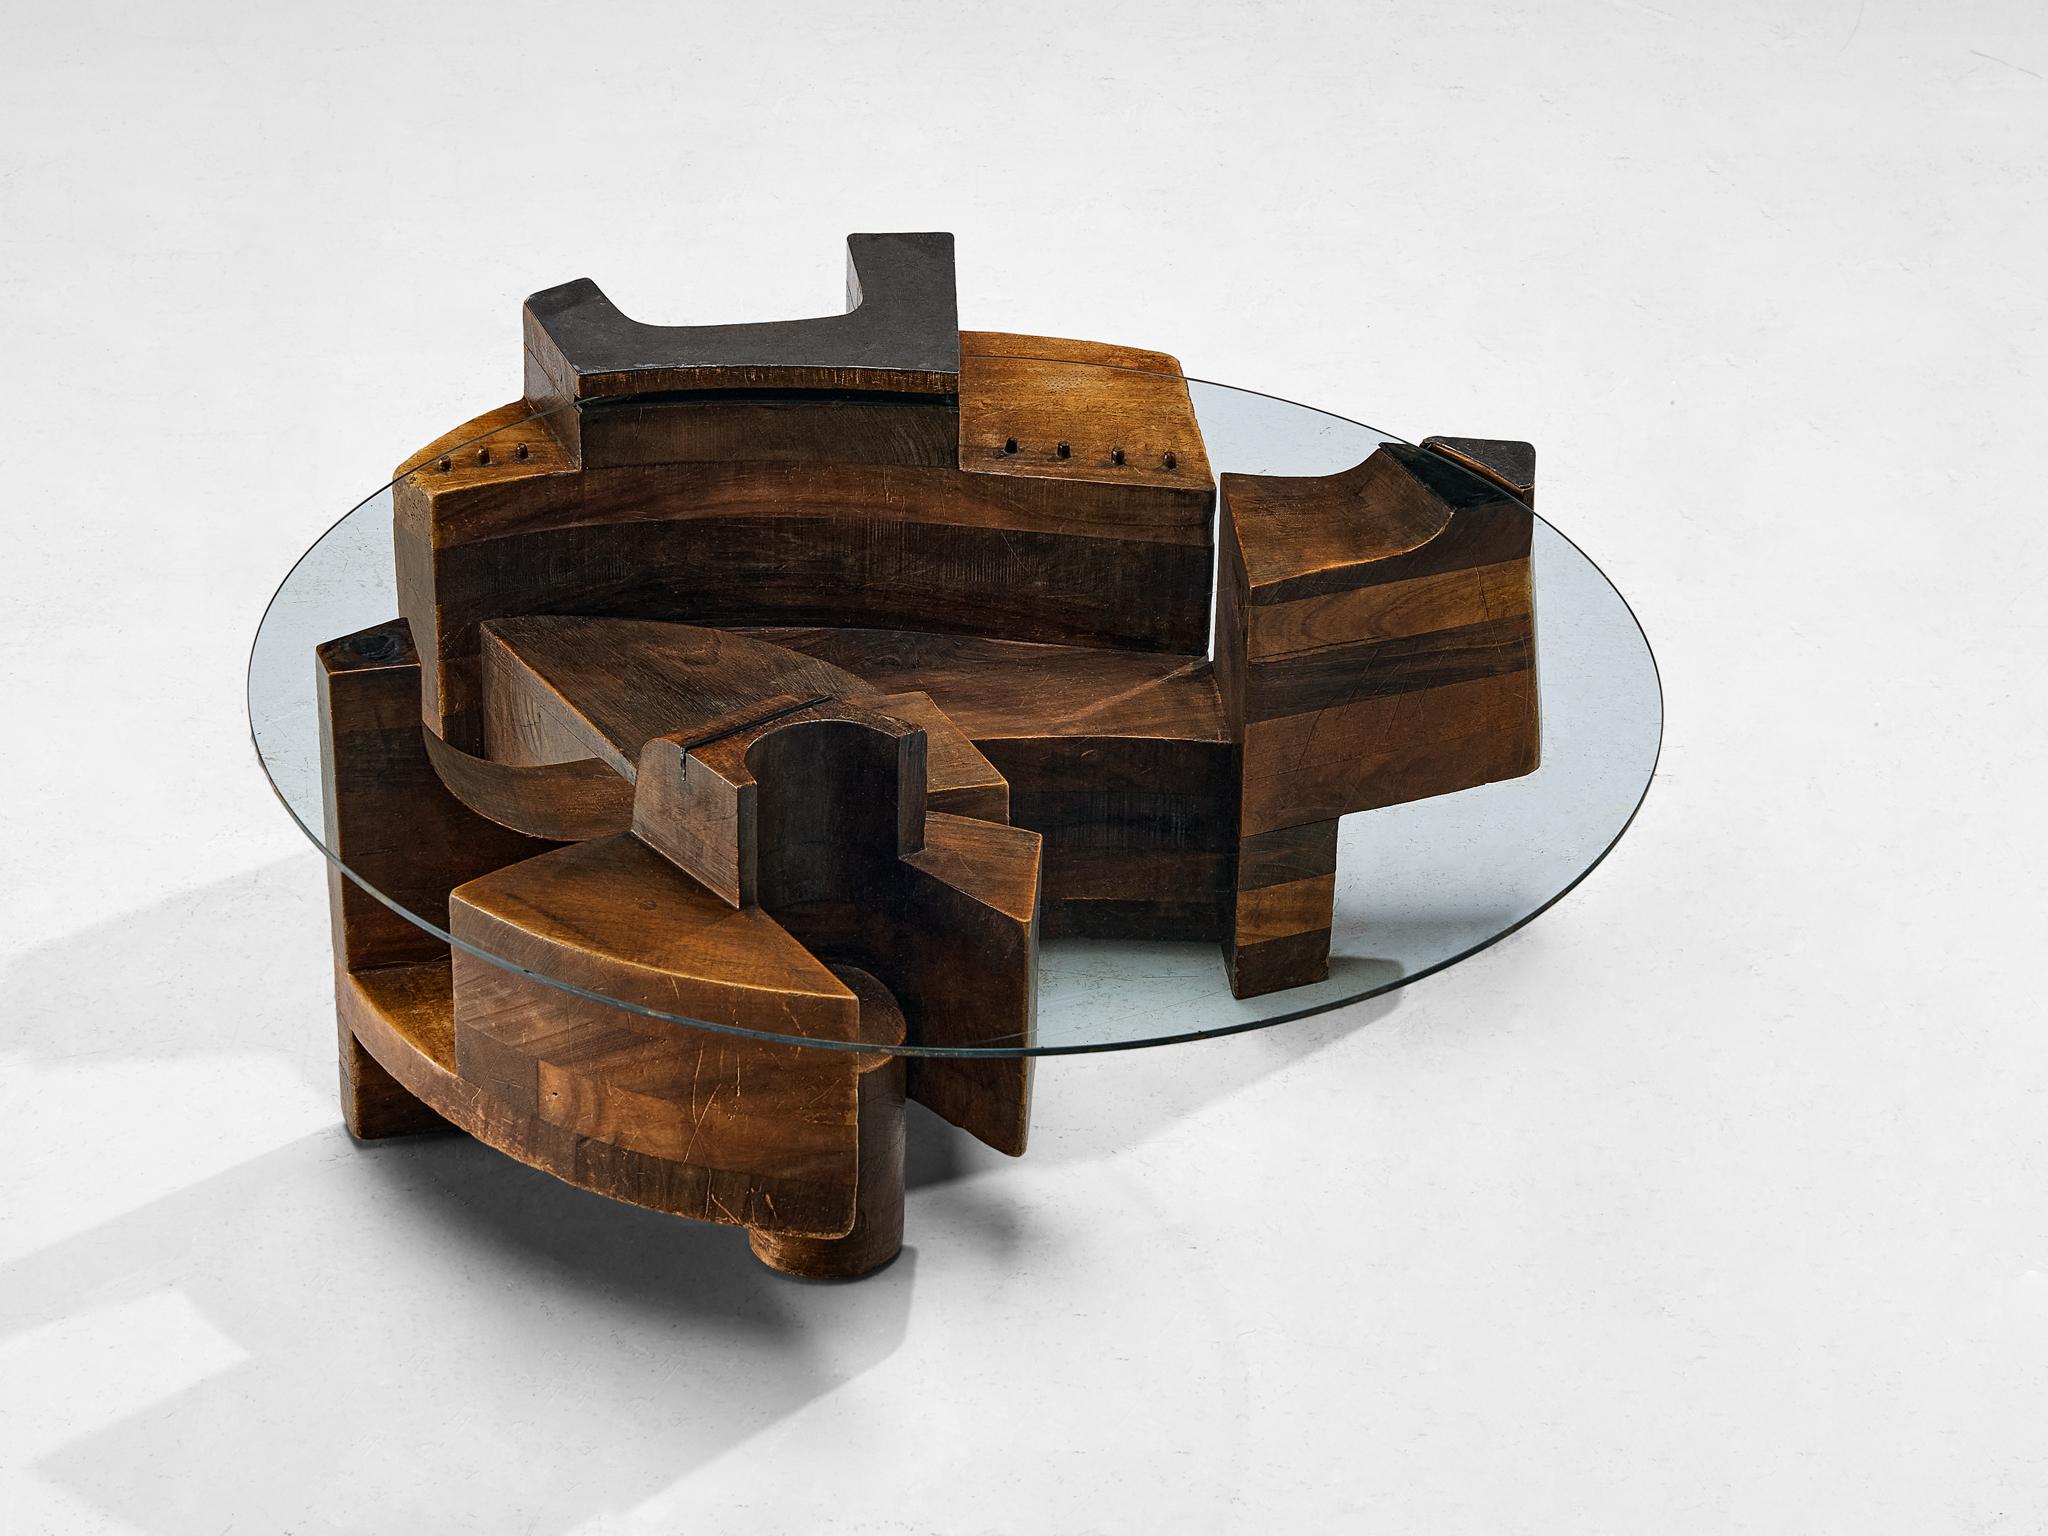 Nerone & Patuzzi for Gruppo NP2 Sculptural Coffee Table  2